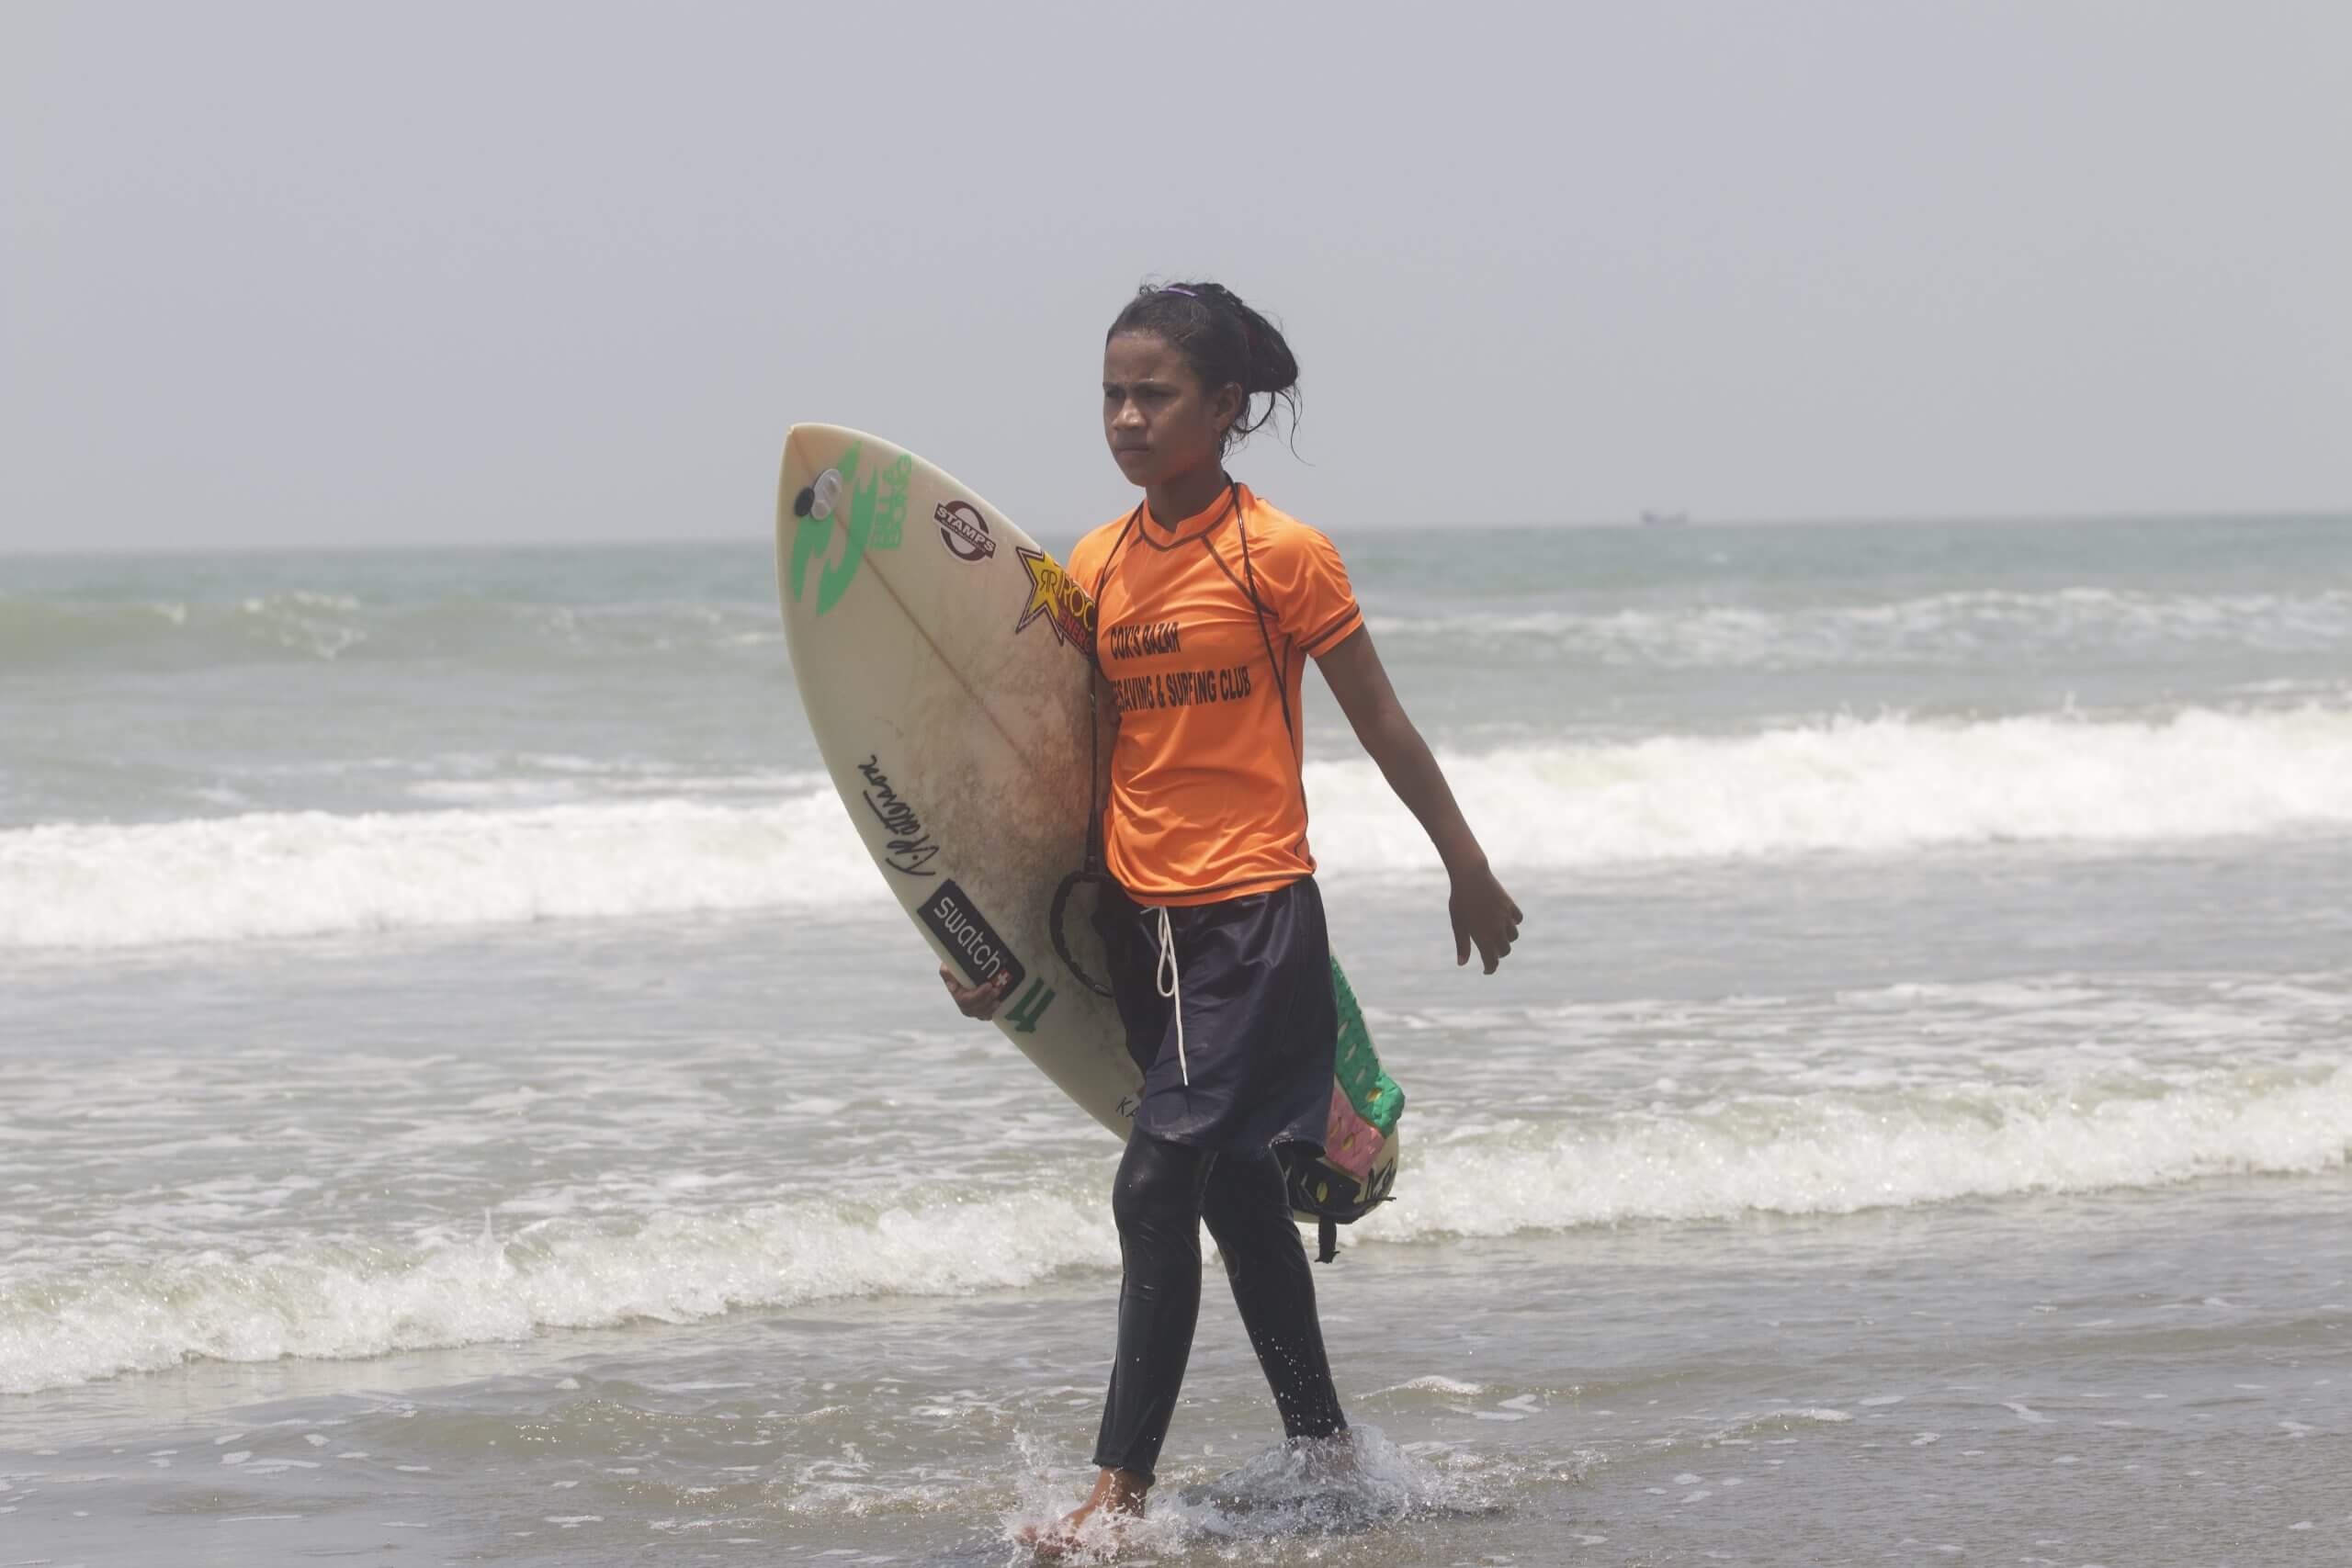 Still from Bangla Surf Girls. A young girl is walking on the shore of the ocean, she is holding a surf board with one arm.